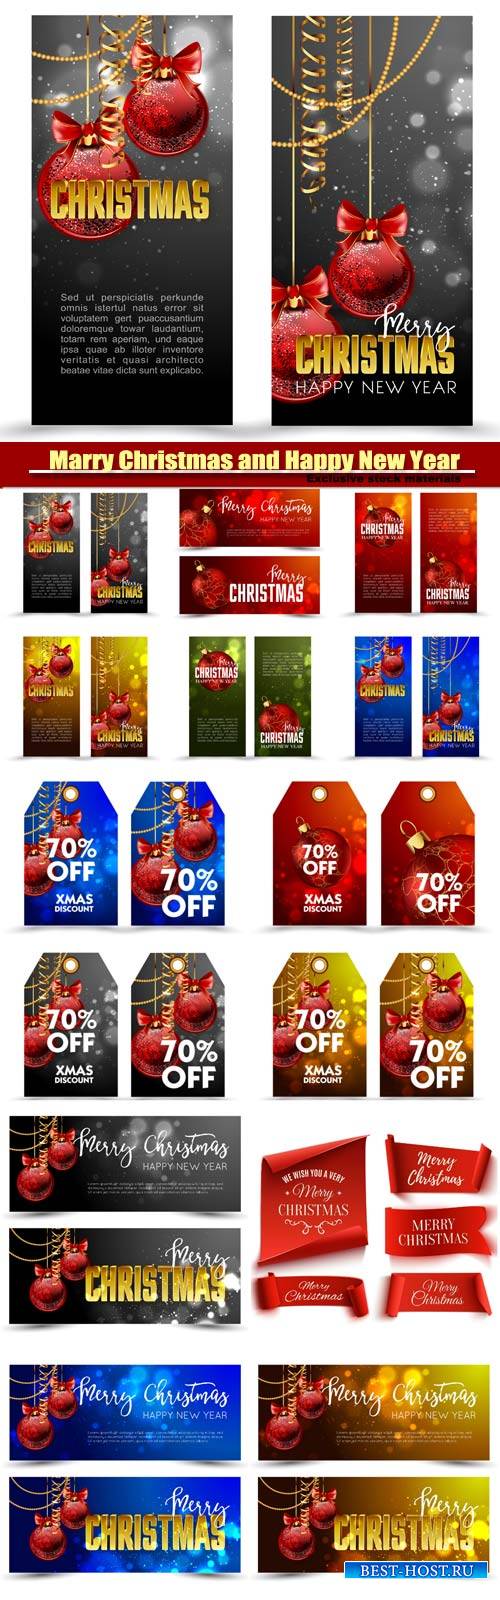 Marry Christmas and Happy New Year vector, tag with decoration ball and labels, web banners set